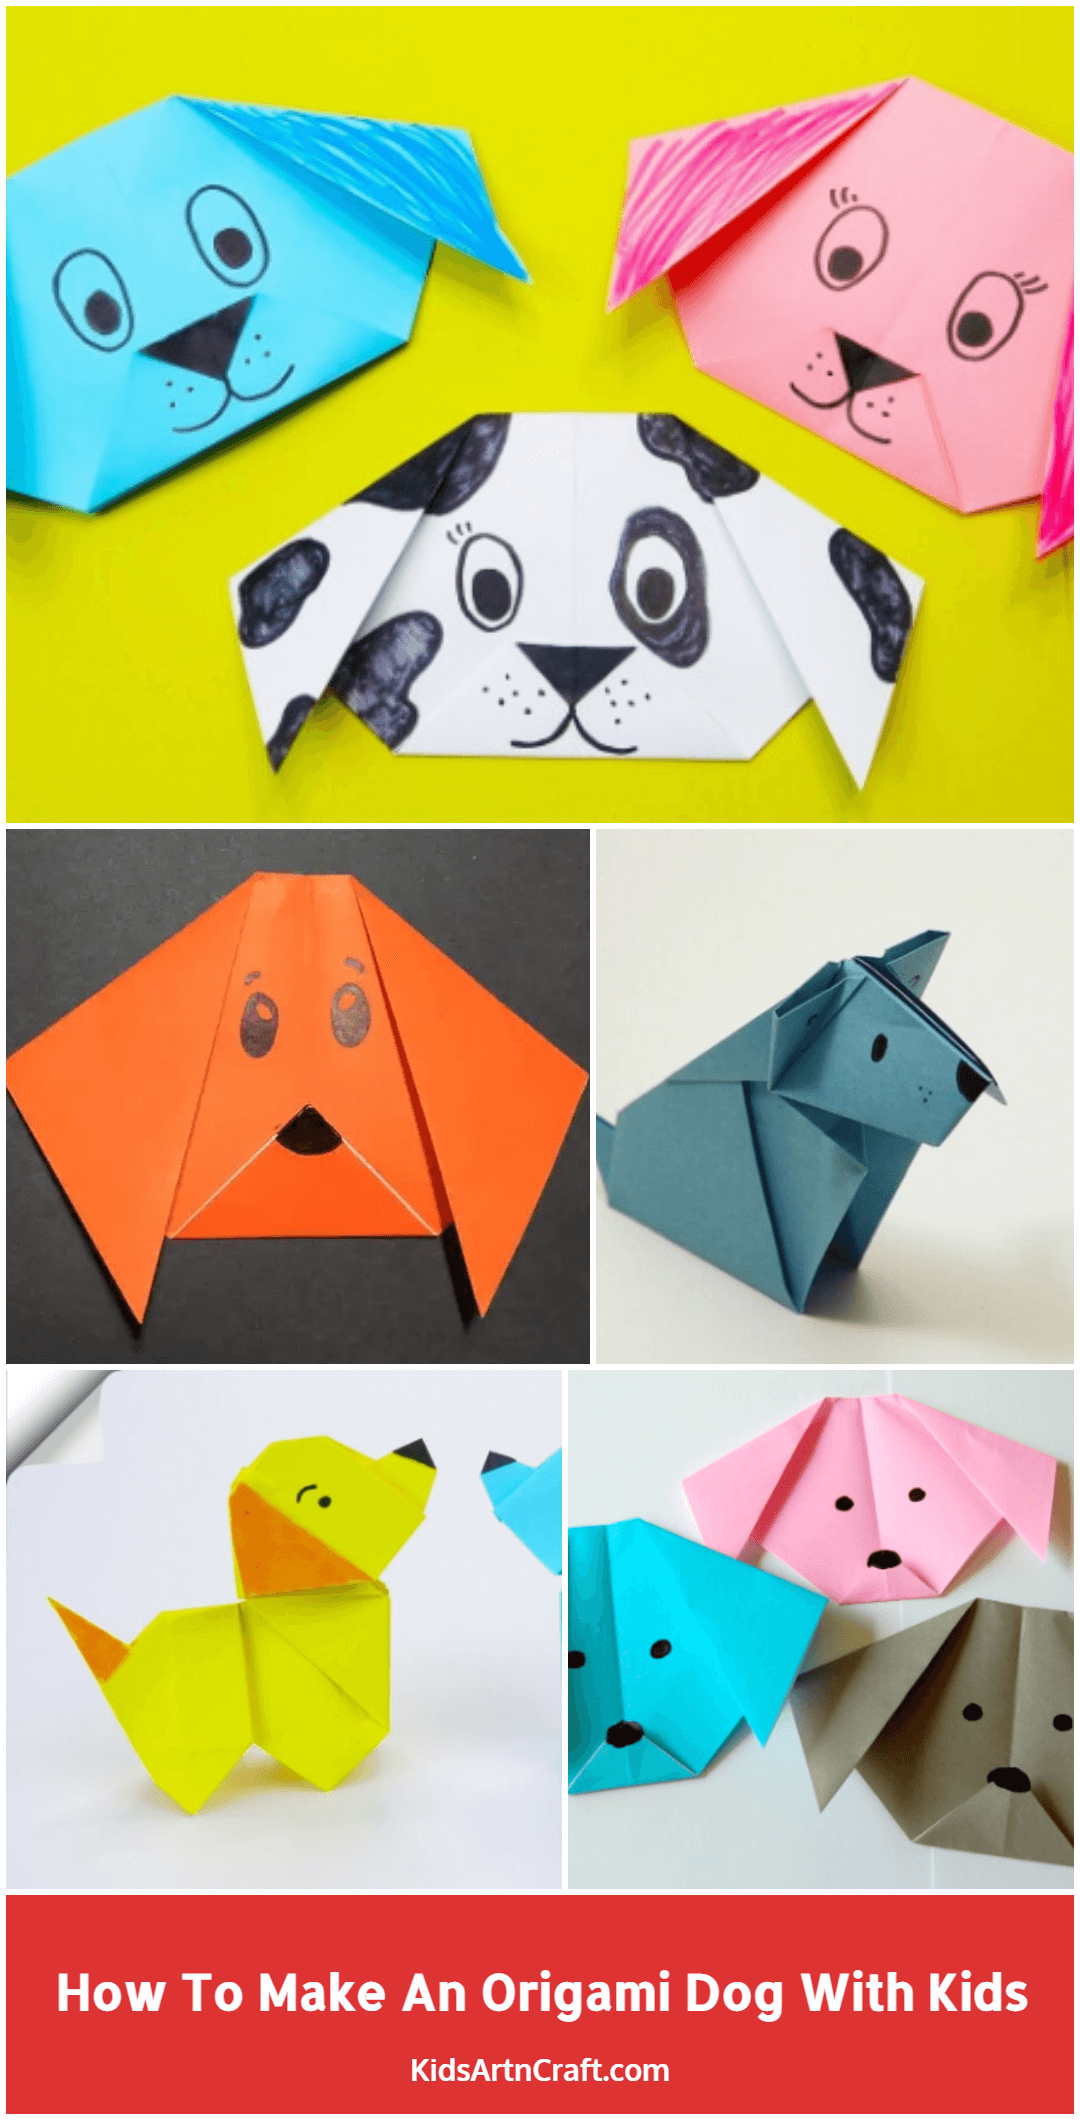 How To Make An Origami Dog With Kids